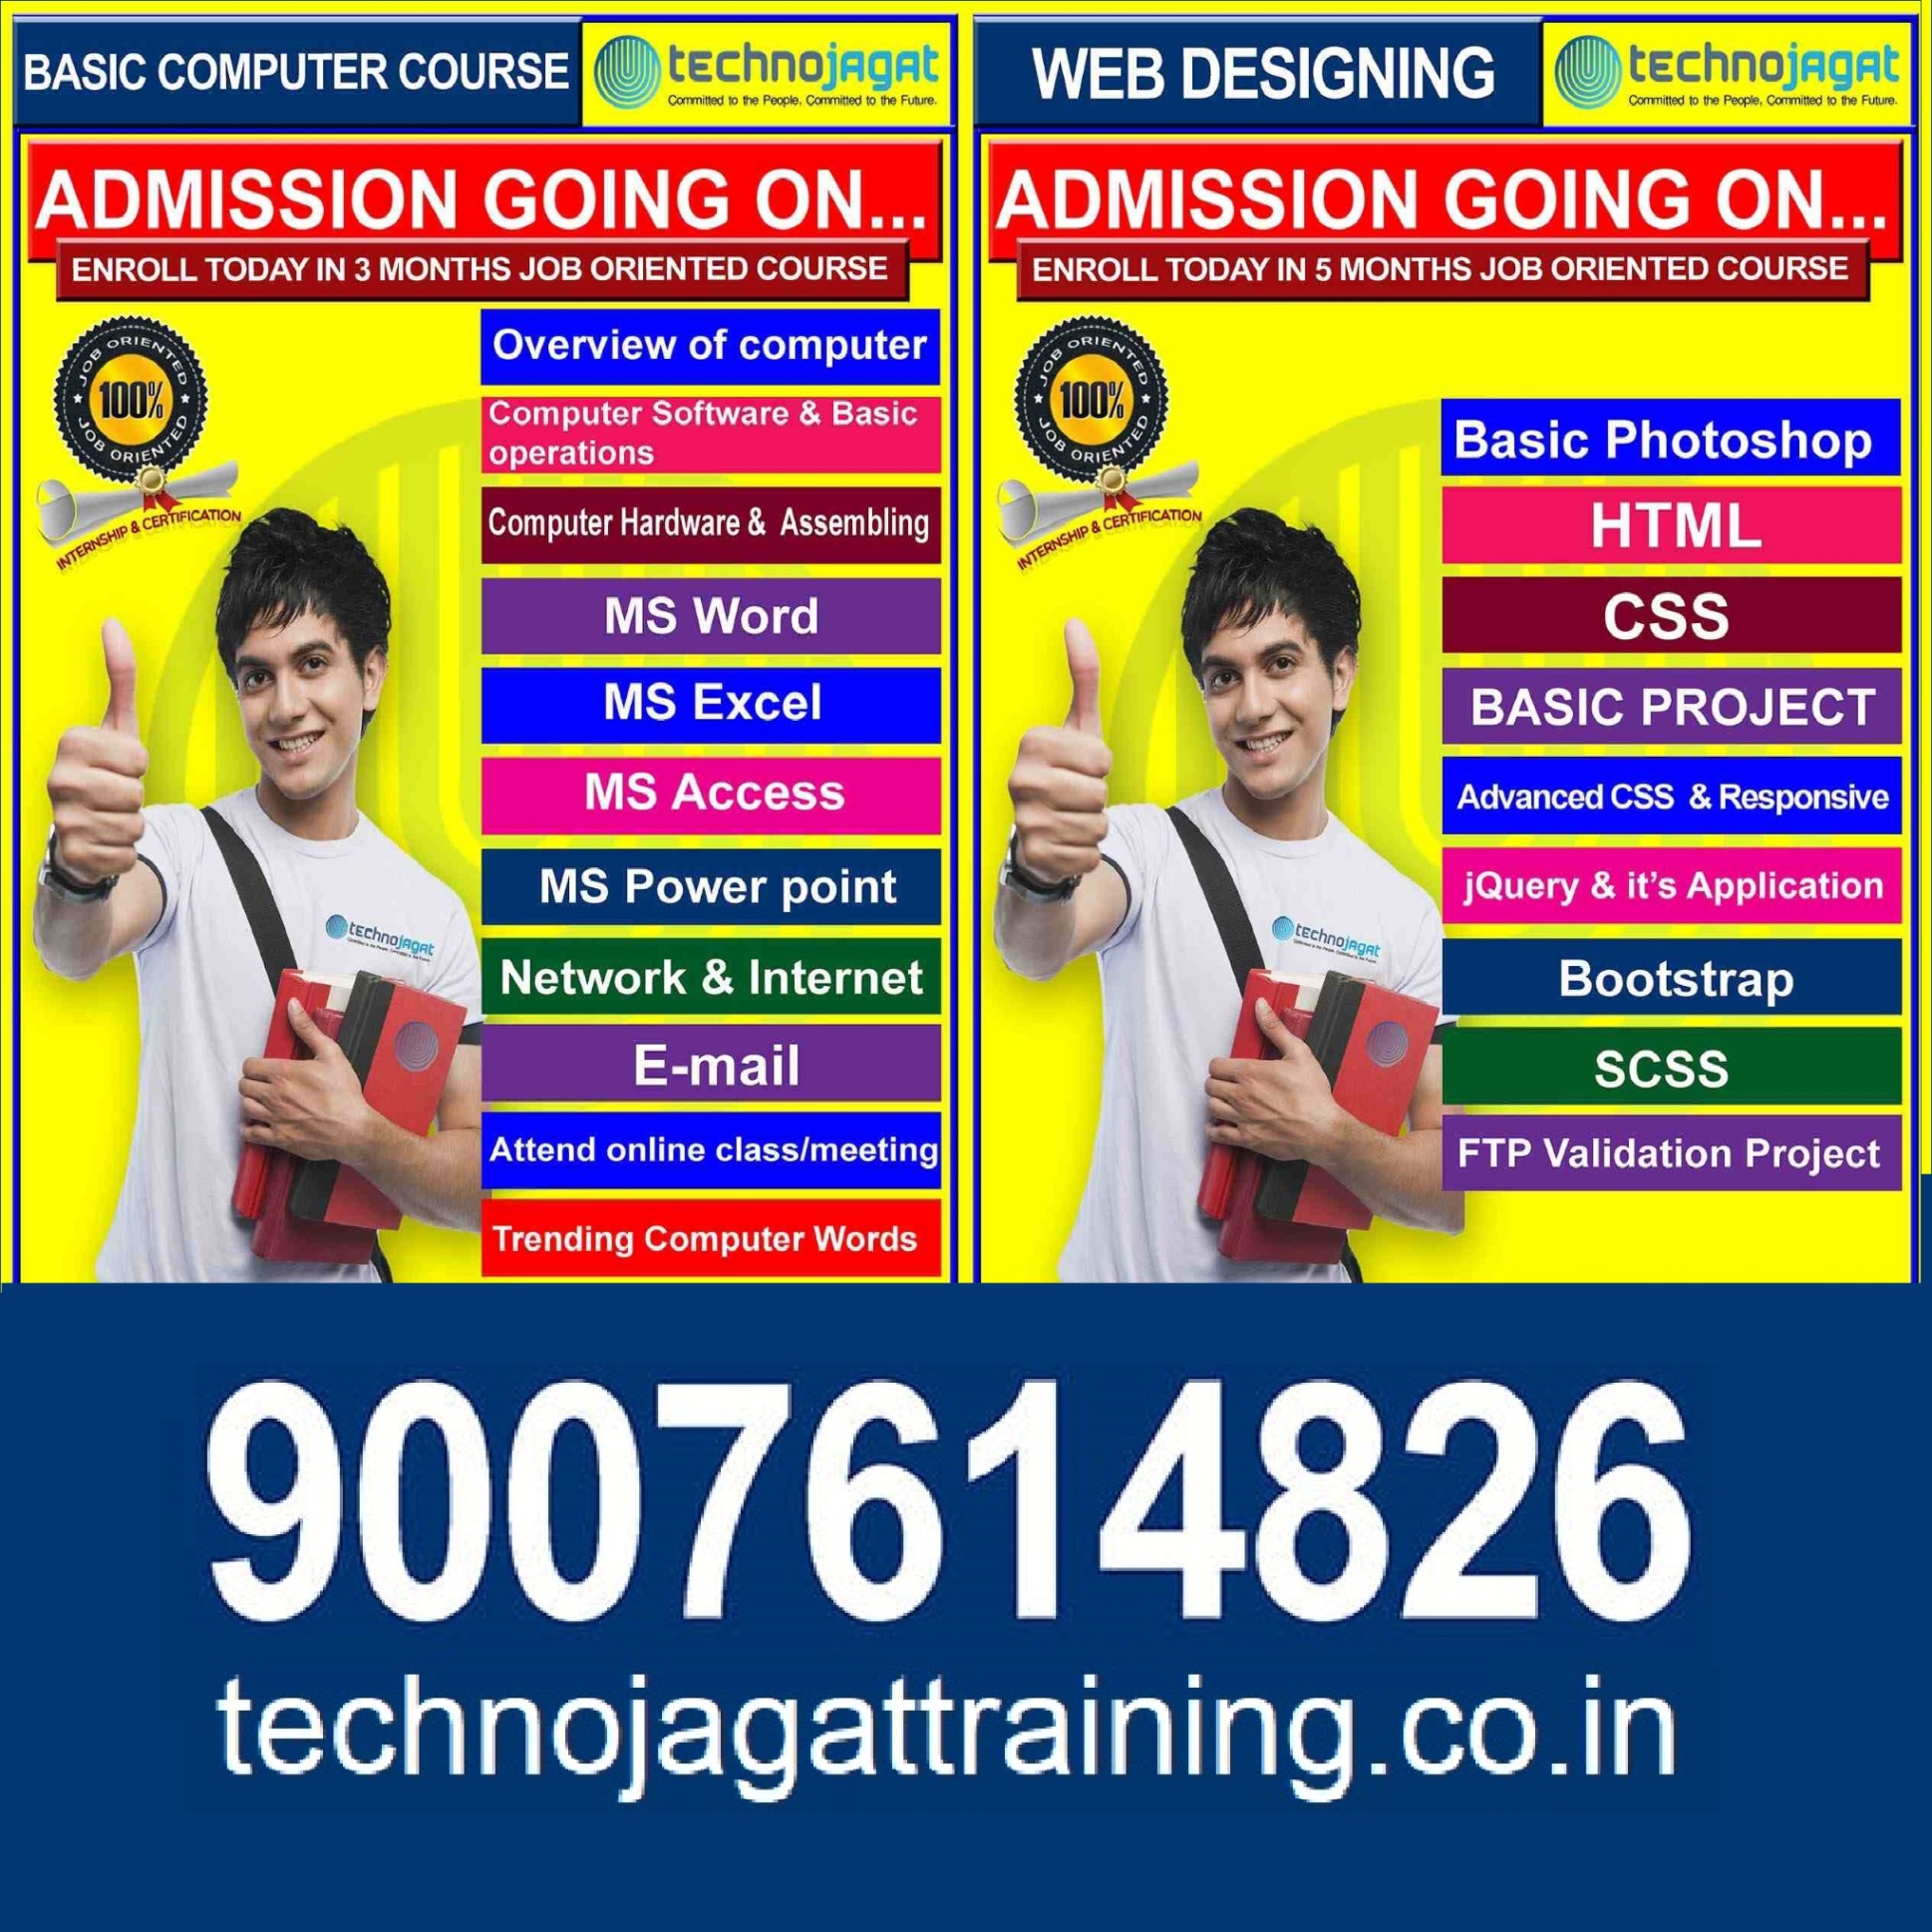 Discover the Best Computer Courses in Kolkata at Our Training Institute